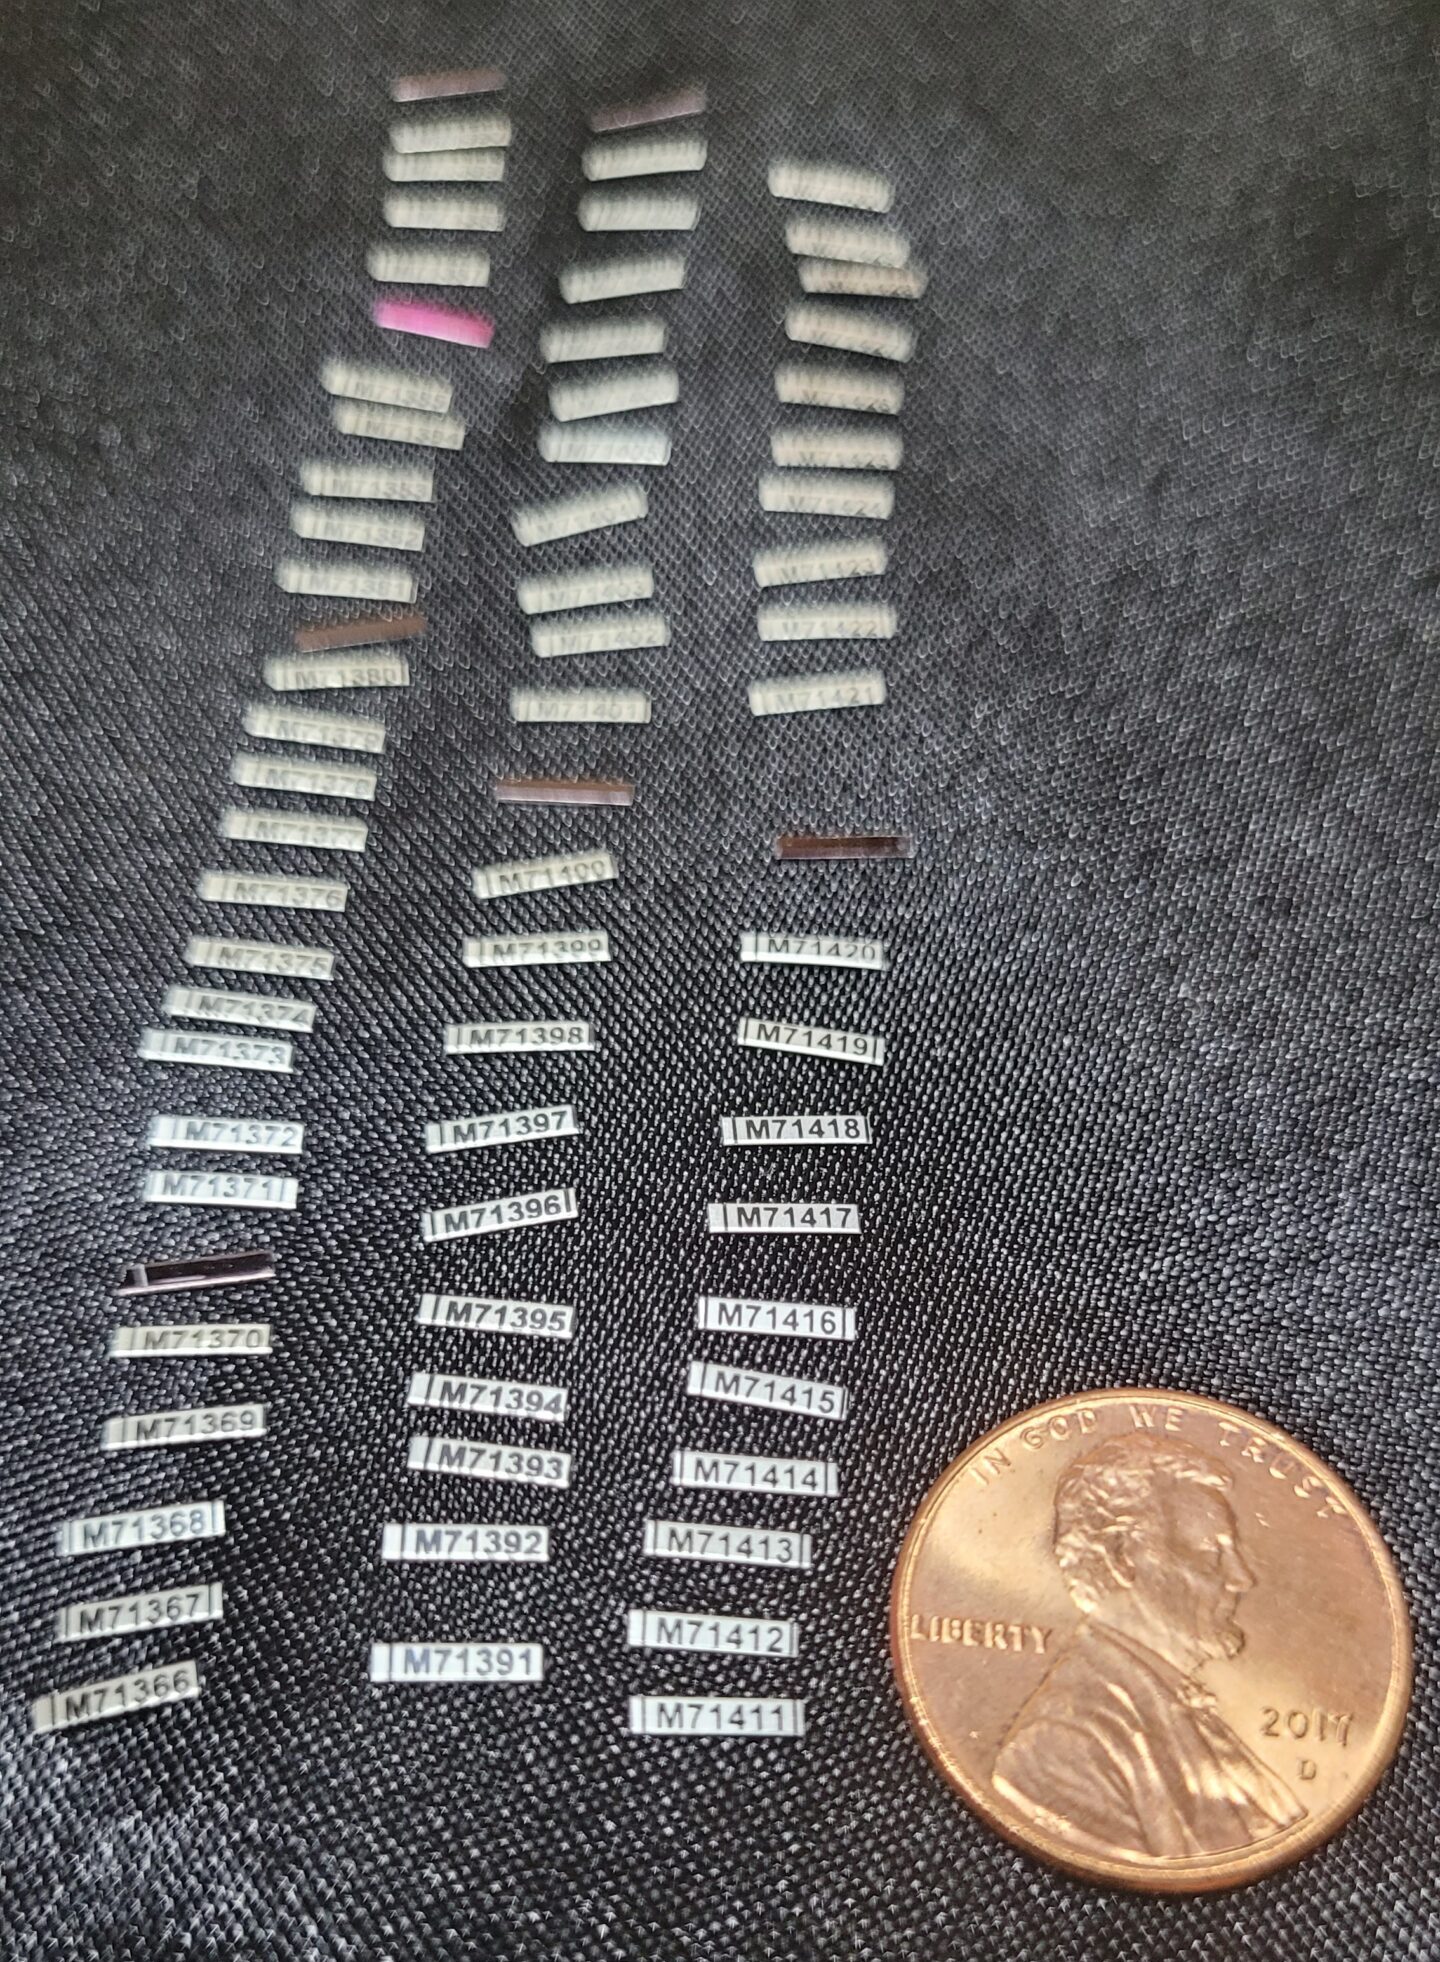 about seventy flat, unformed hummingbird bands laid out on a table. A penny for scale shows each band is about the length of Abraham Lincoln's head. The numbers on the band are about the size of the year stamped on the penny